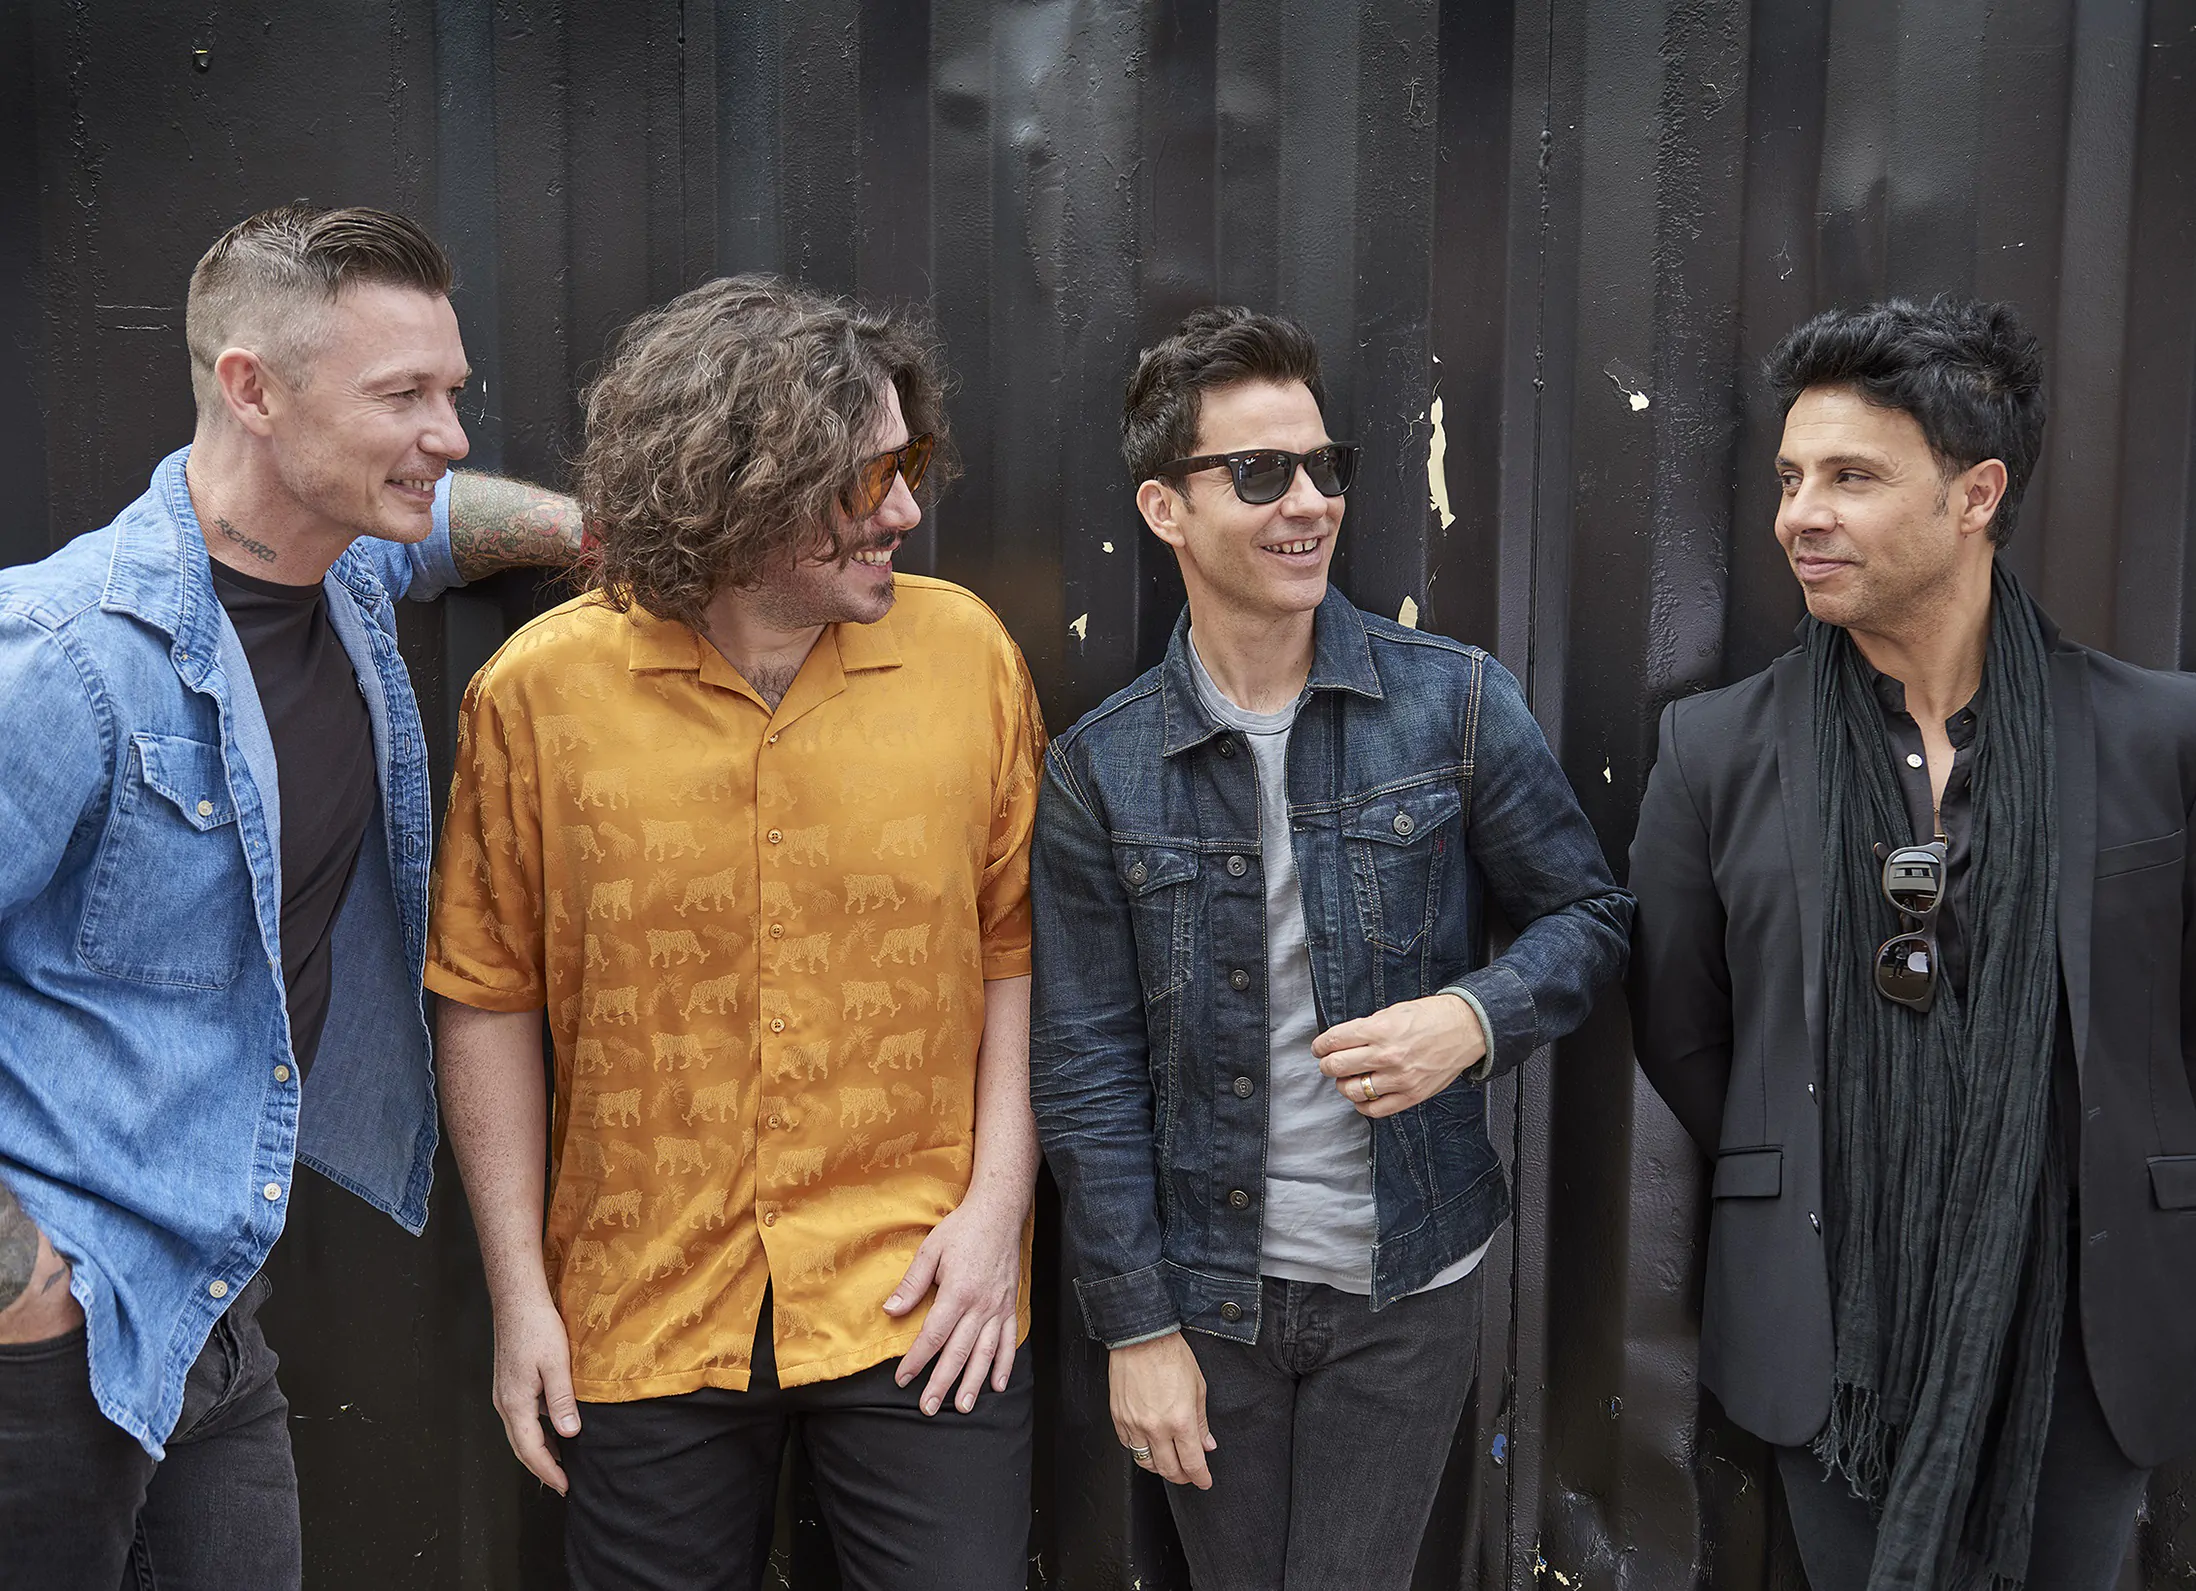 STEREOPHONICS announce new album ‘Oochya!’ – Hear first single ‘Hanging On Your Hinges’